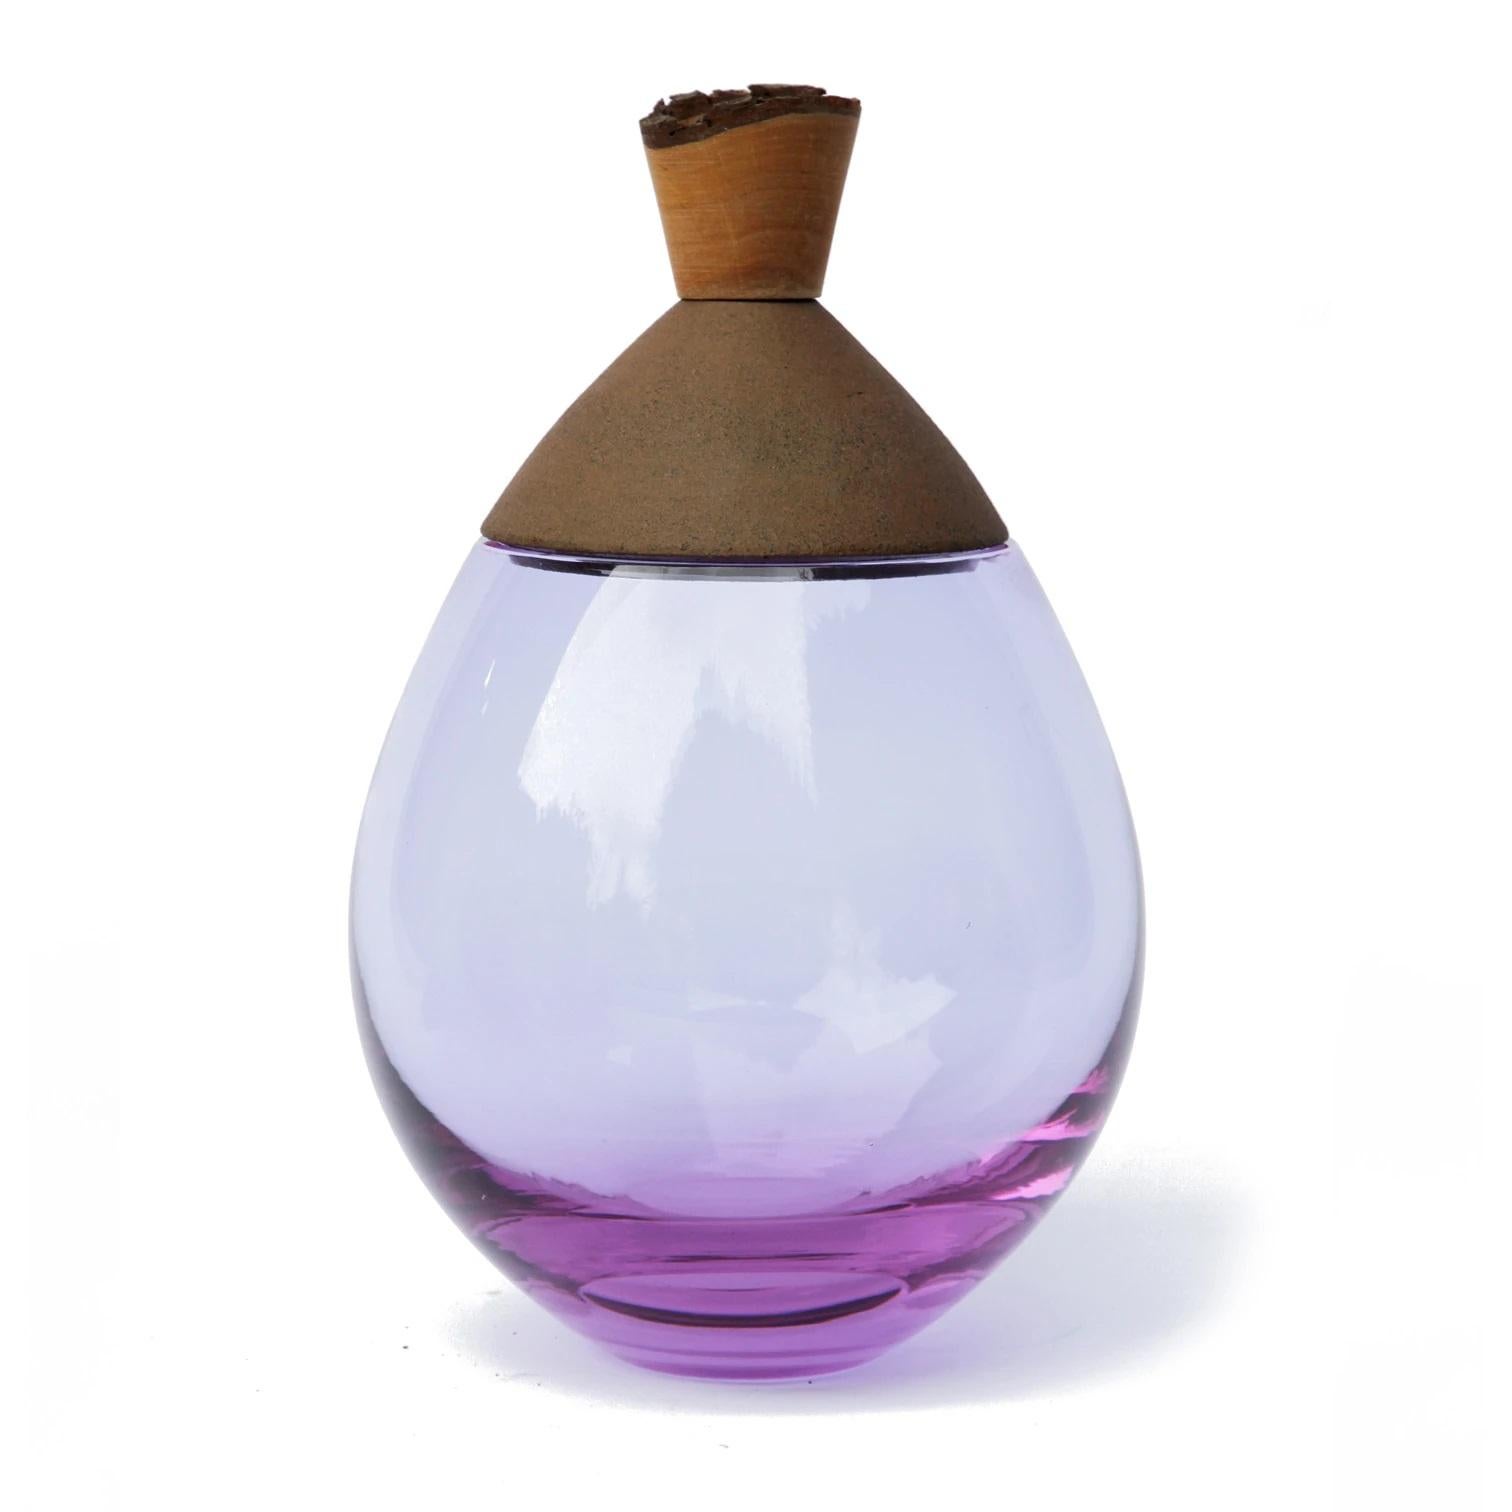 Lavender and brown Satu stacking vessel, Pia Wüstenberg
Dimensions: D 19 x H 23
Materials: glass, wood, ceramic
Available in other colors.

Handmade in Europe: handblown glass (Czech Republic), earthenware ceramic (Germany), hand turned wood